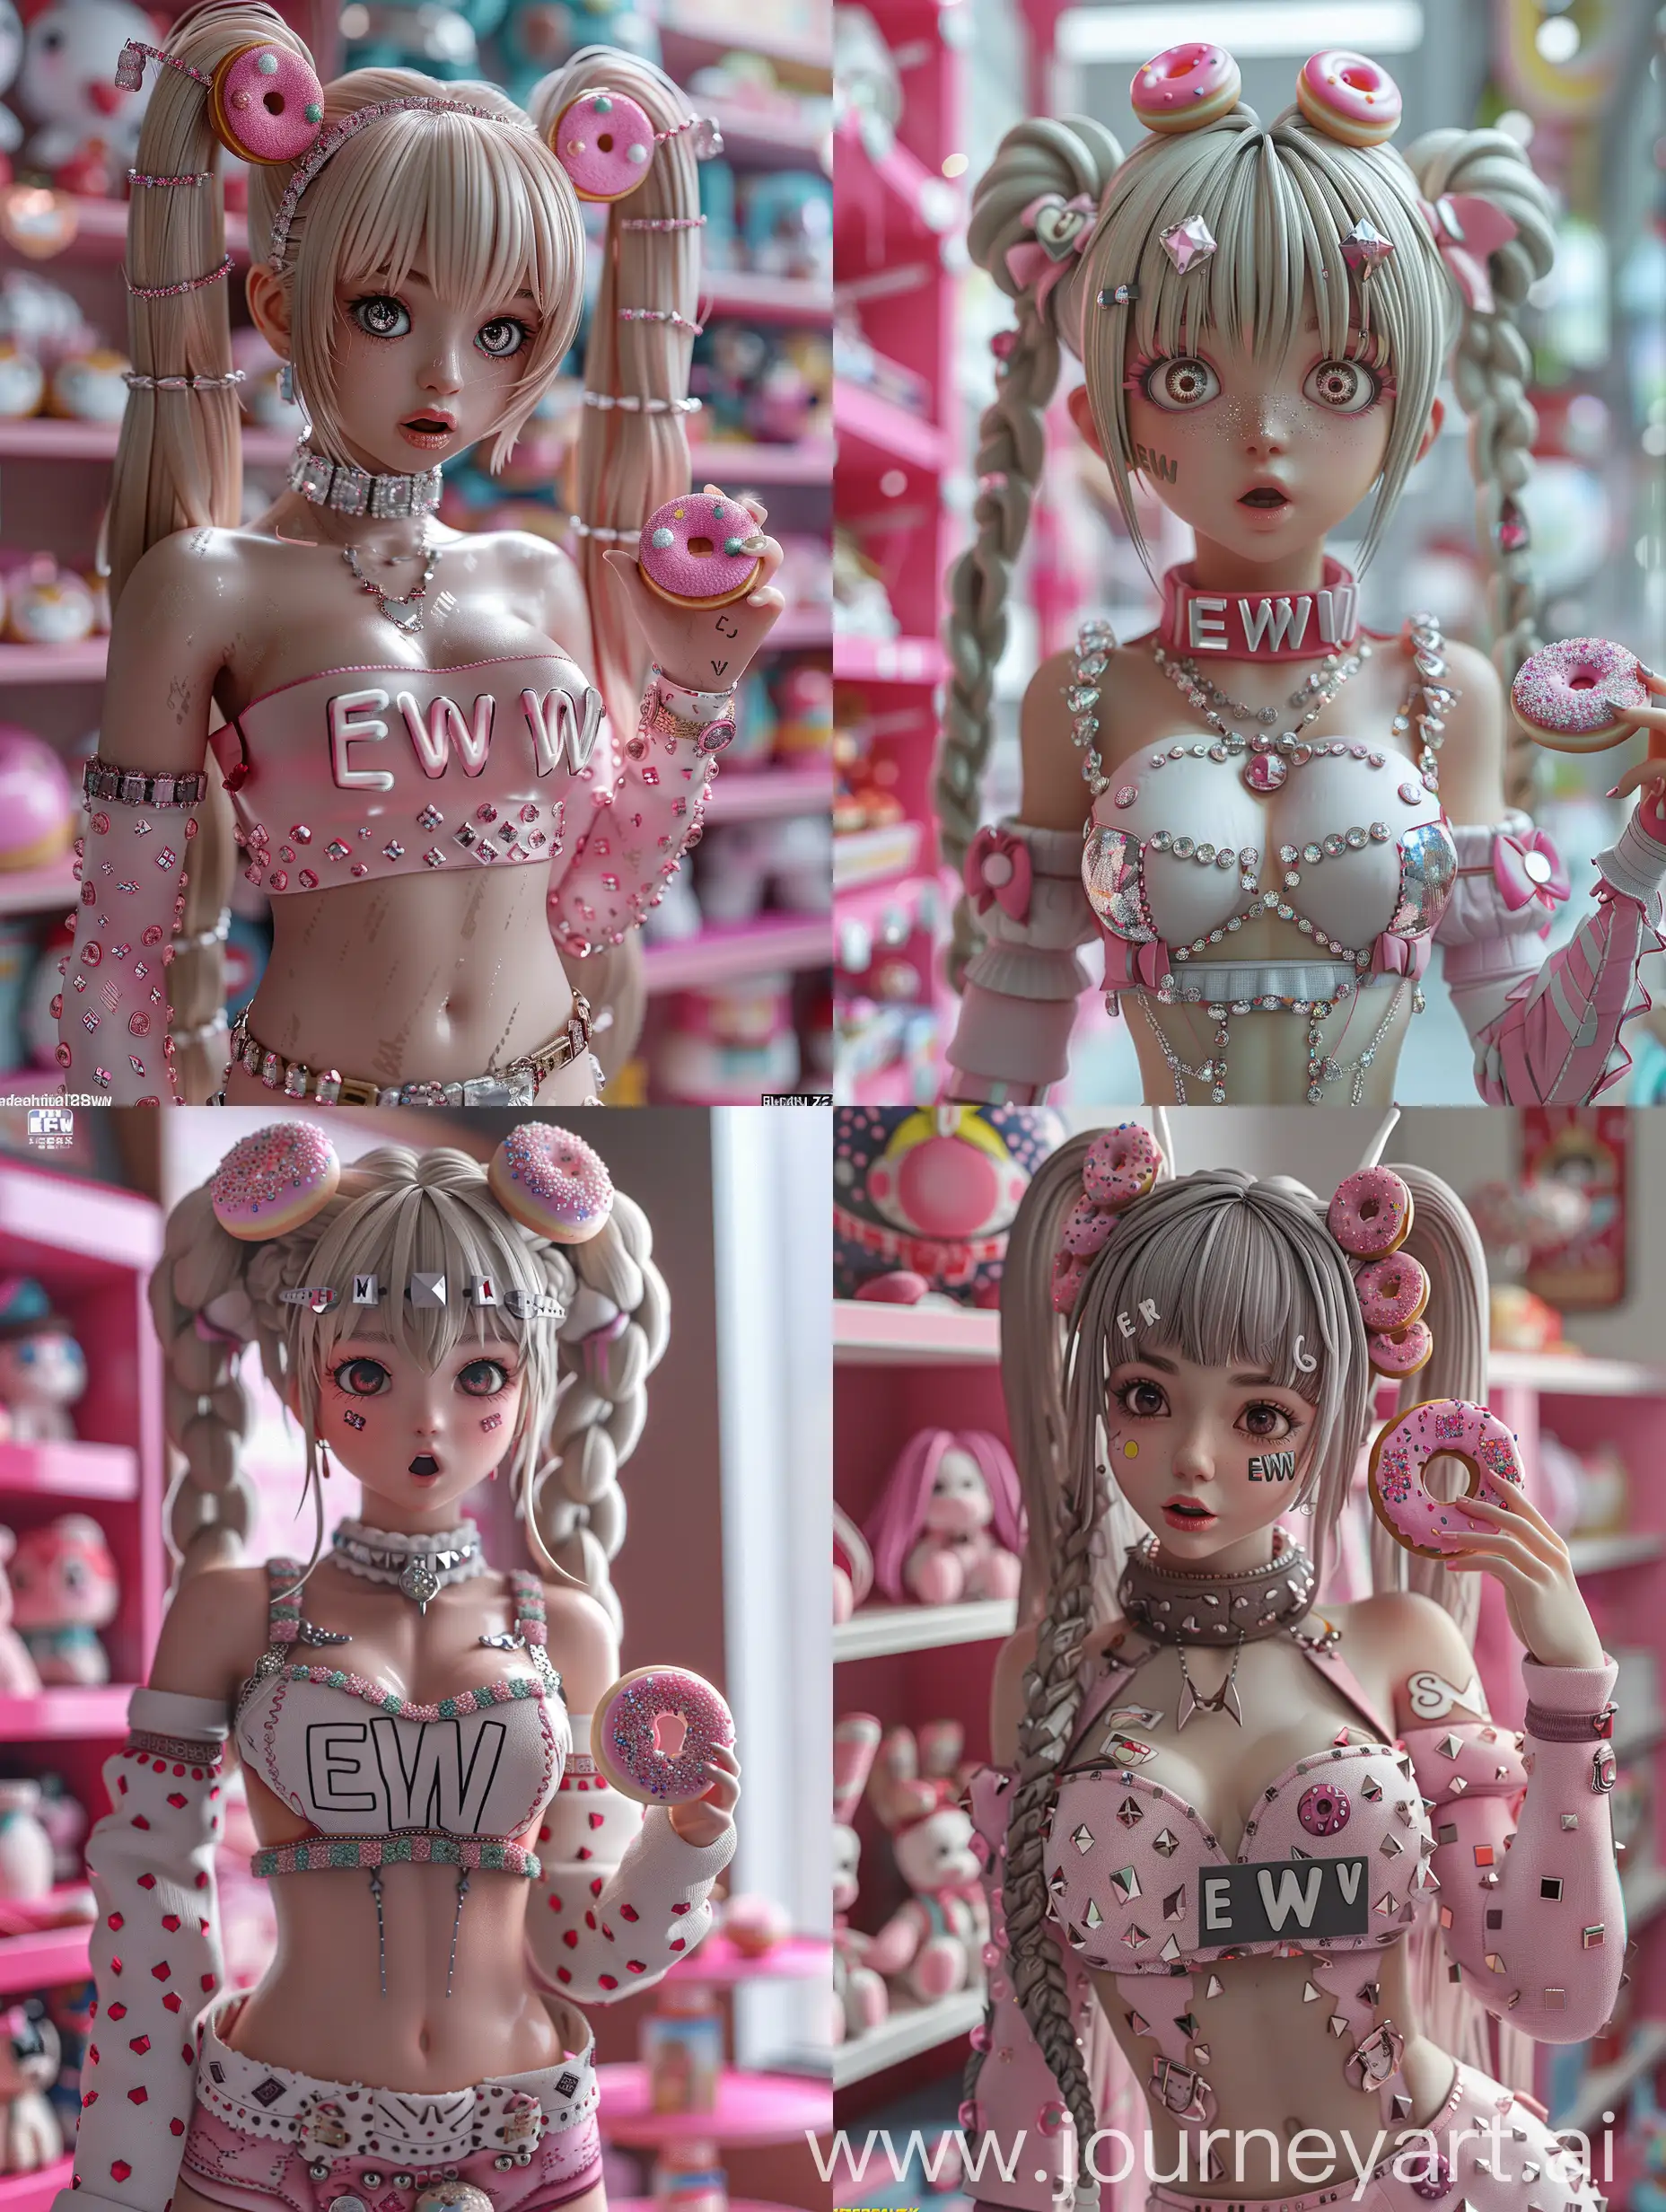 Adorable-Anime-Character-with-EWW-Collar-and-Pink-Donuts-Hair-in-Kawaii-Toy-Shelf-Scene